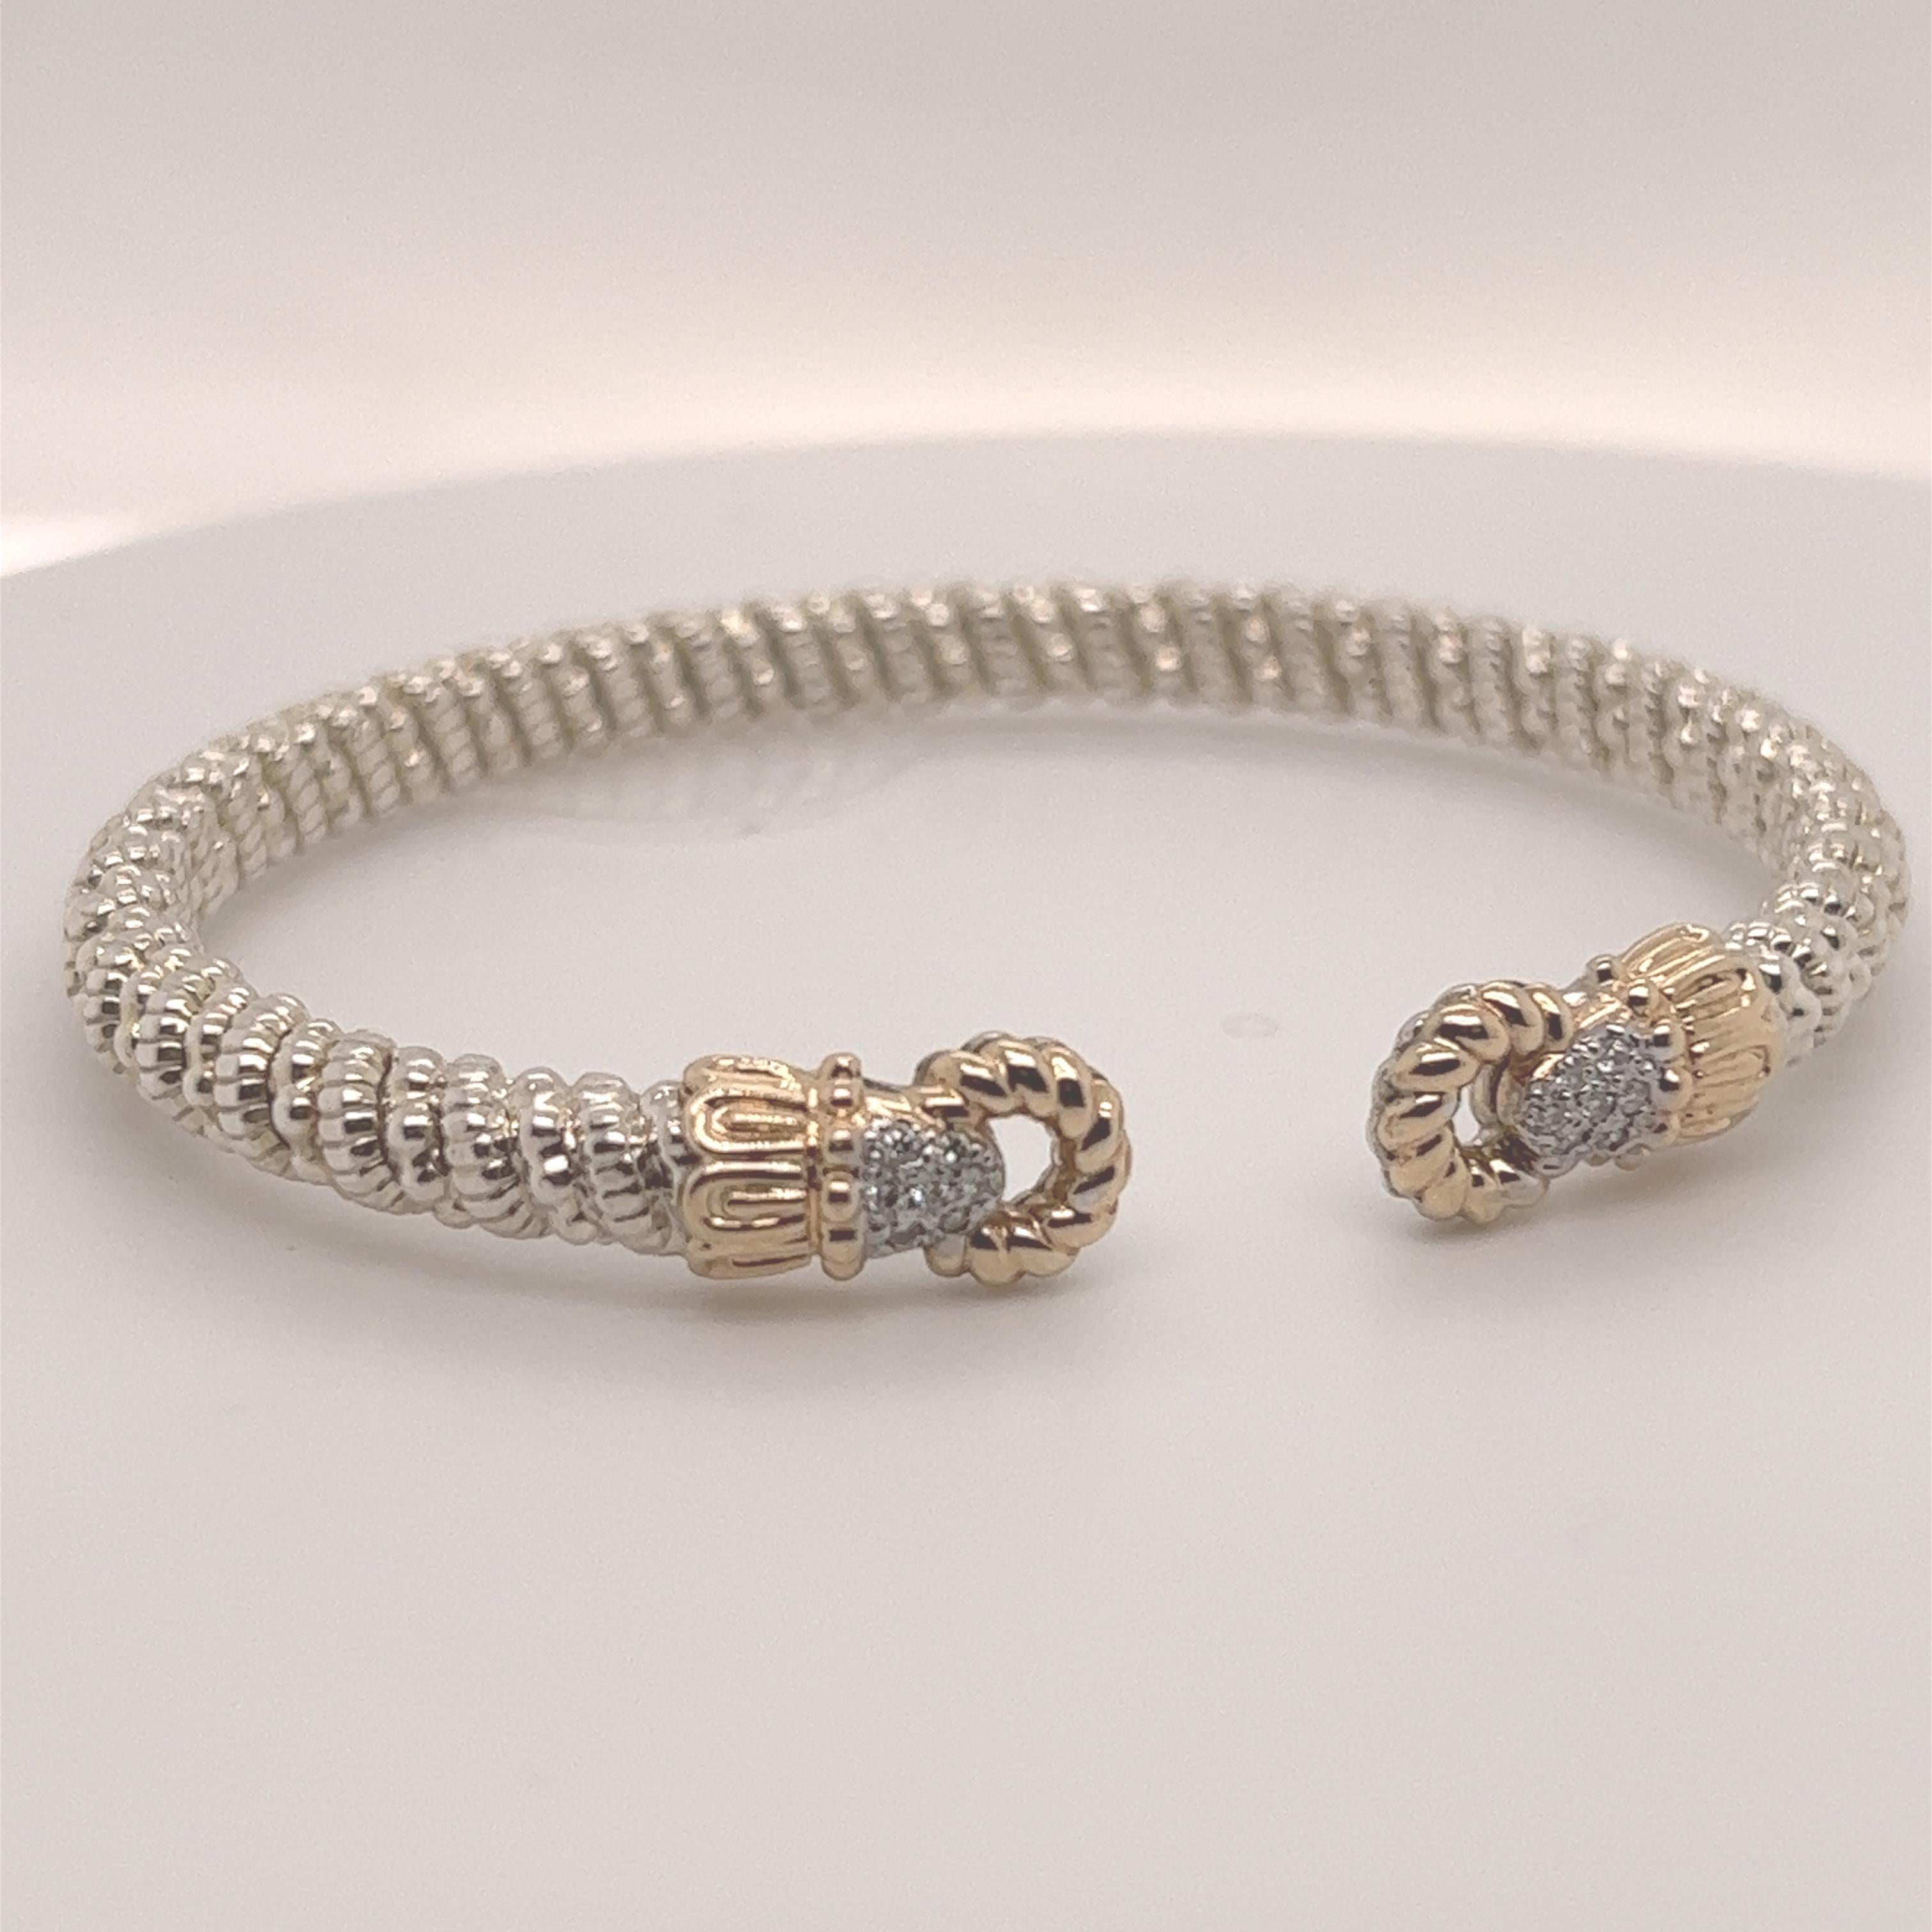 Graceful 4mm diameter open design makes it easy to slip on for any occasion, formal or casual.

Stunning sterling silver band affixed with elegant 14k gold crowns encasing 0.11 carats of brilliant round-cut white diamonds.

Style 22929D04

Includes